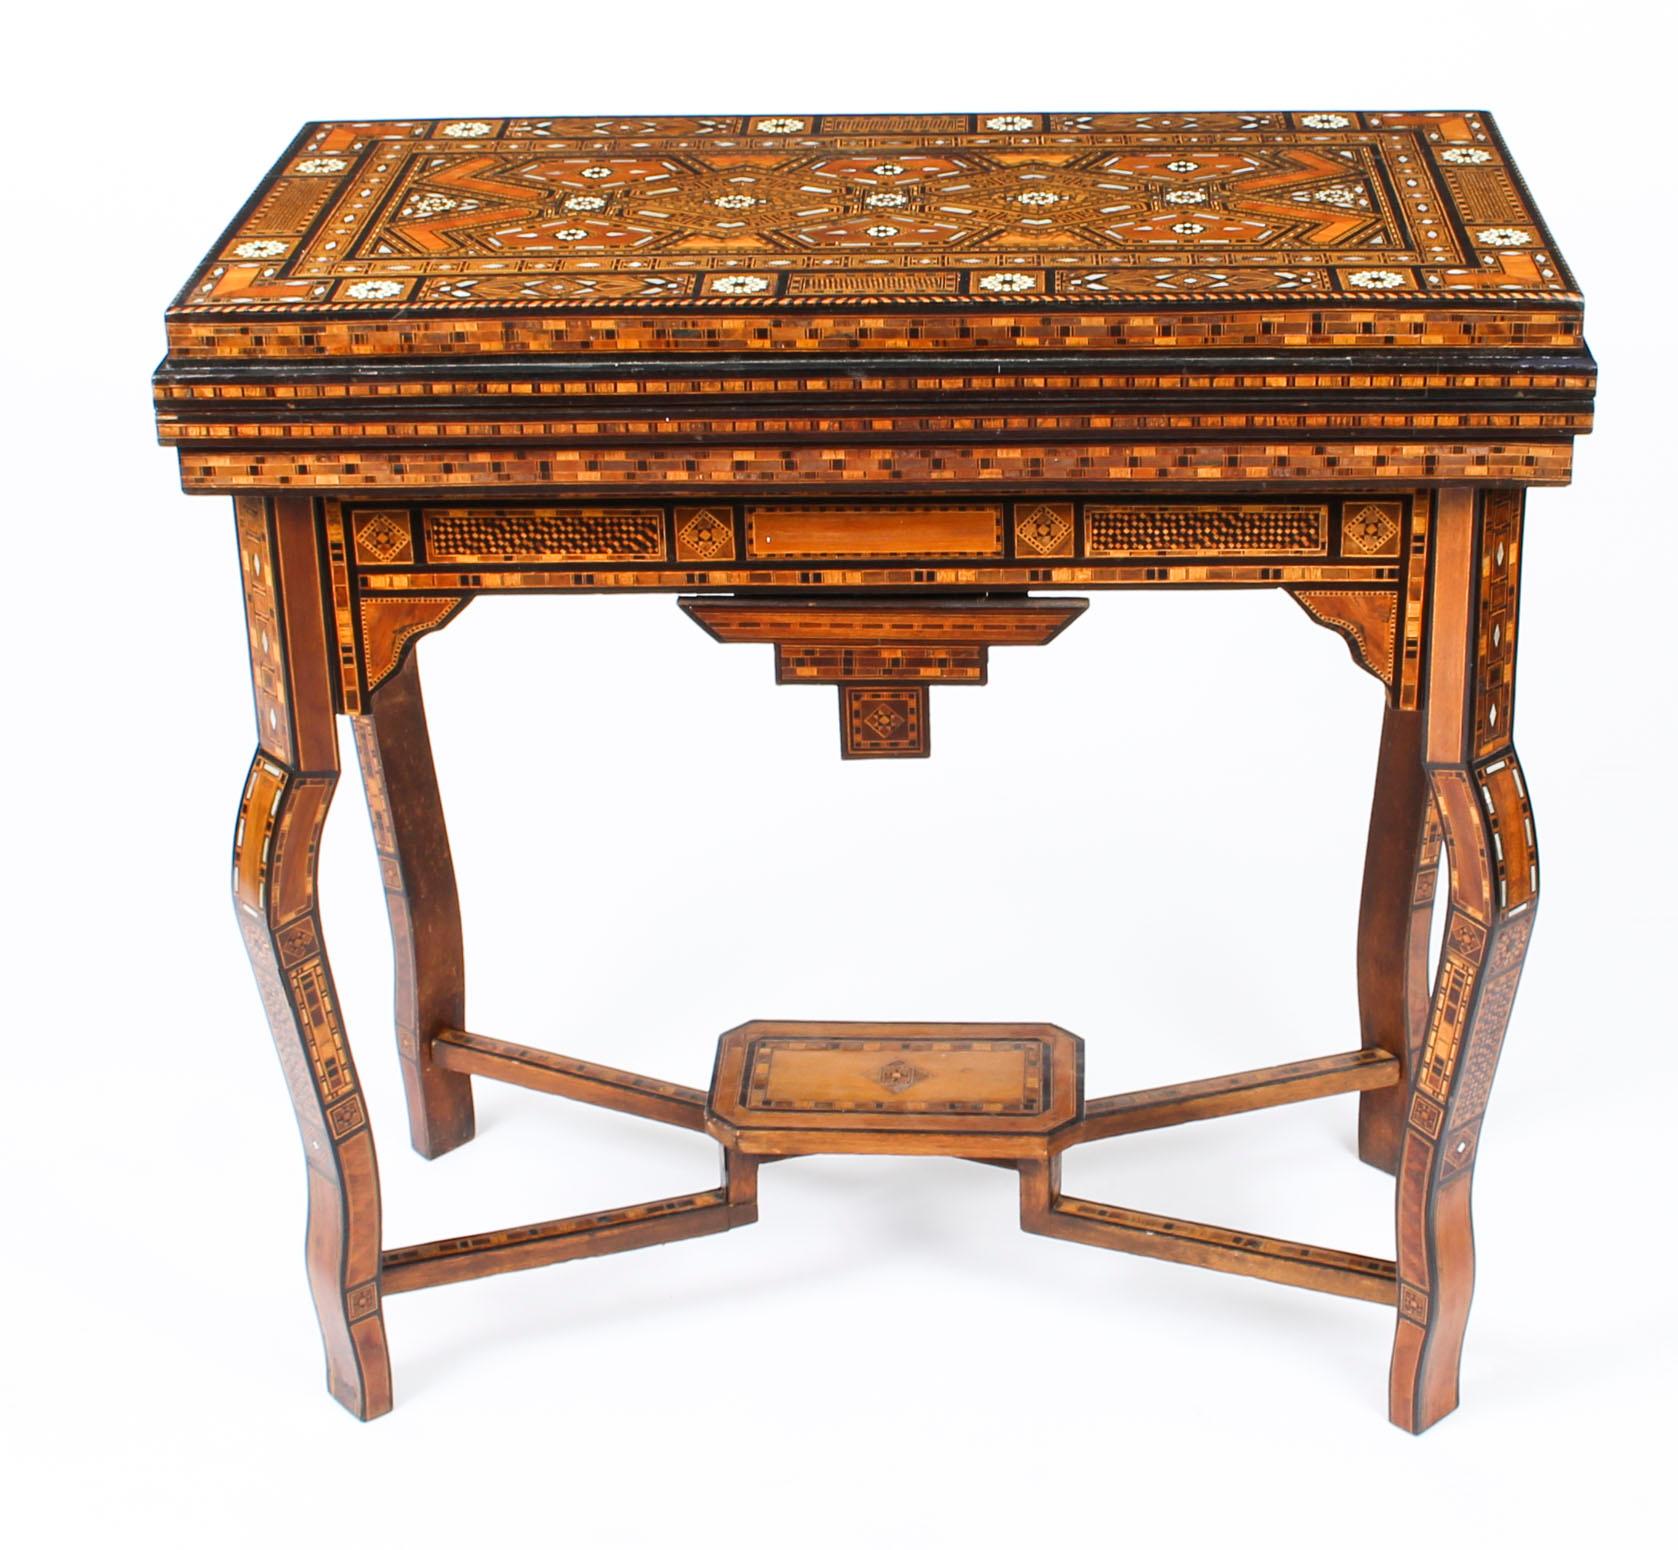 This profusely inlaid Syrian Damascus games table dates from circa 1910, and has multiple geometric and asymmetric inlays of various woods and mother of pearl.

The hinged lid opens to reveal a similarly inlaid interior and a removable reversible